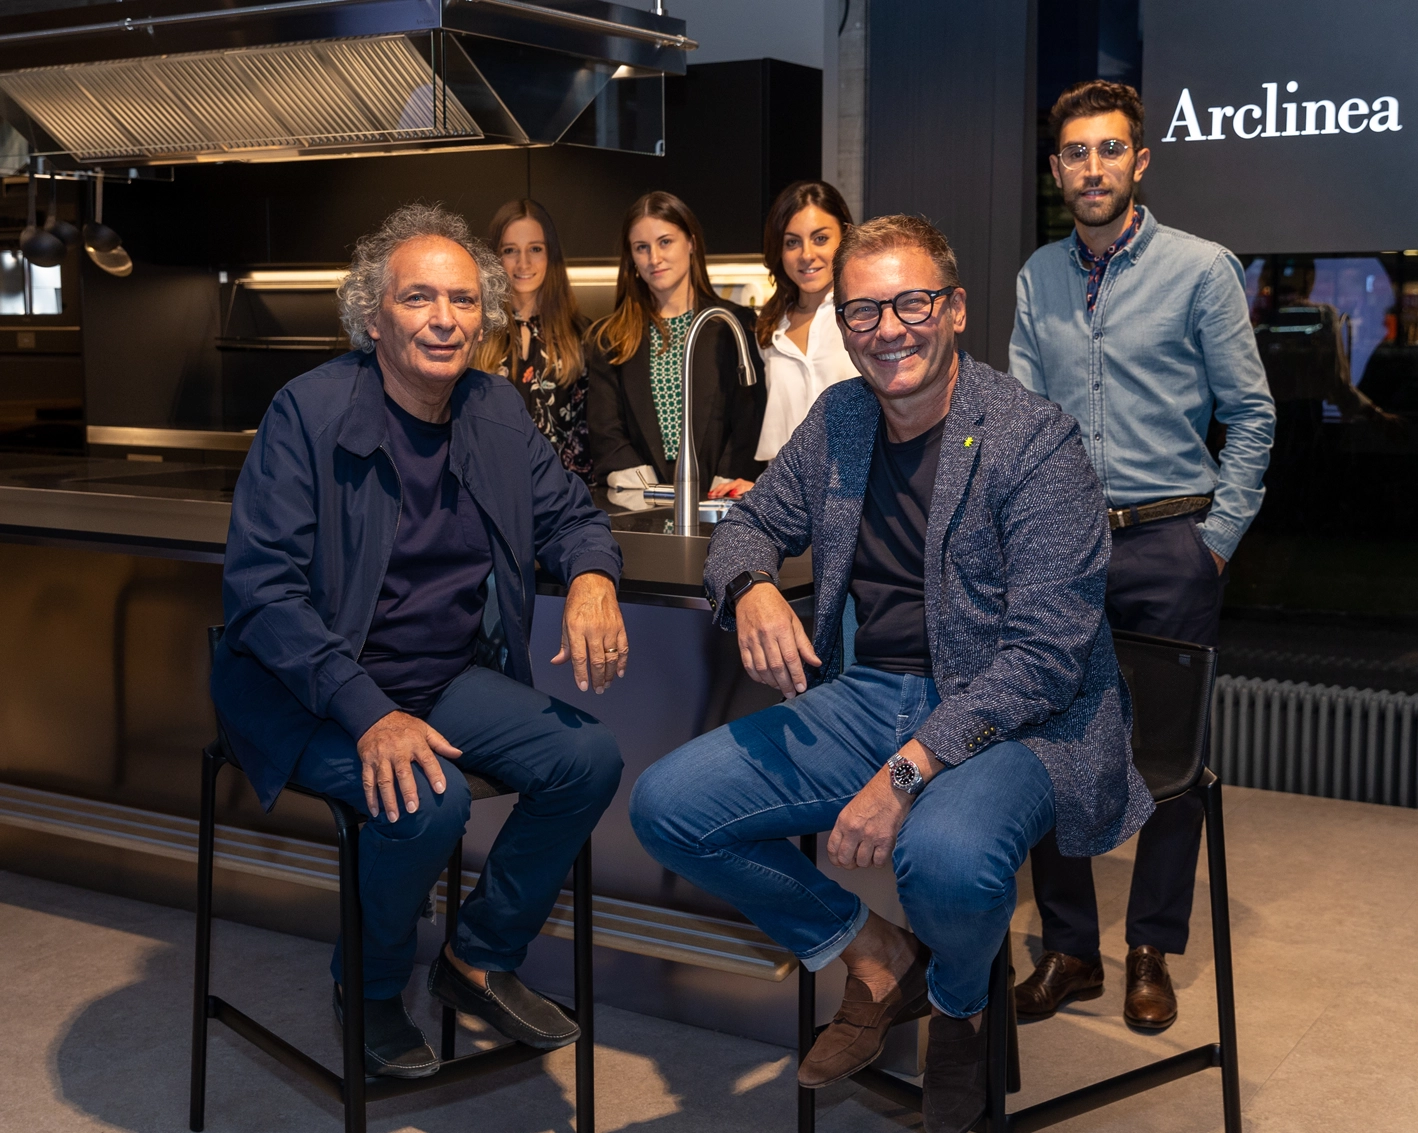 Photography by the Fontana team. The two founders are sitting on two stools in the foreground, while behind them are four staff members